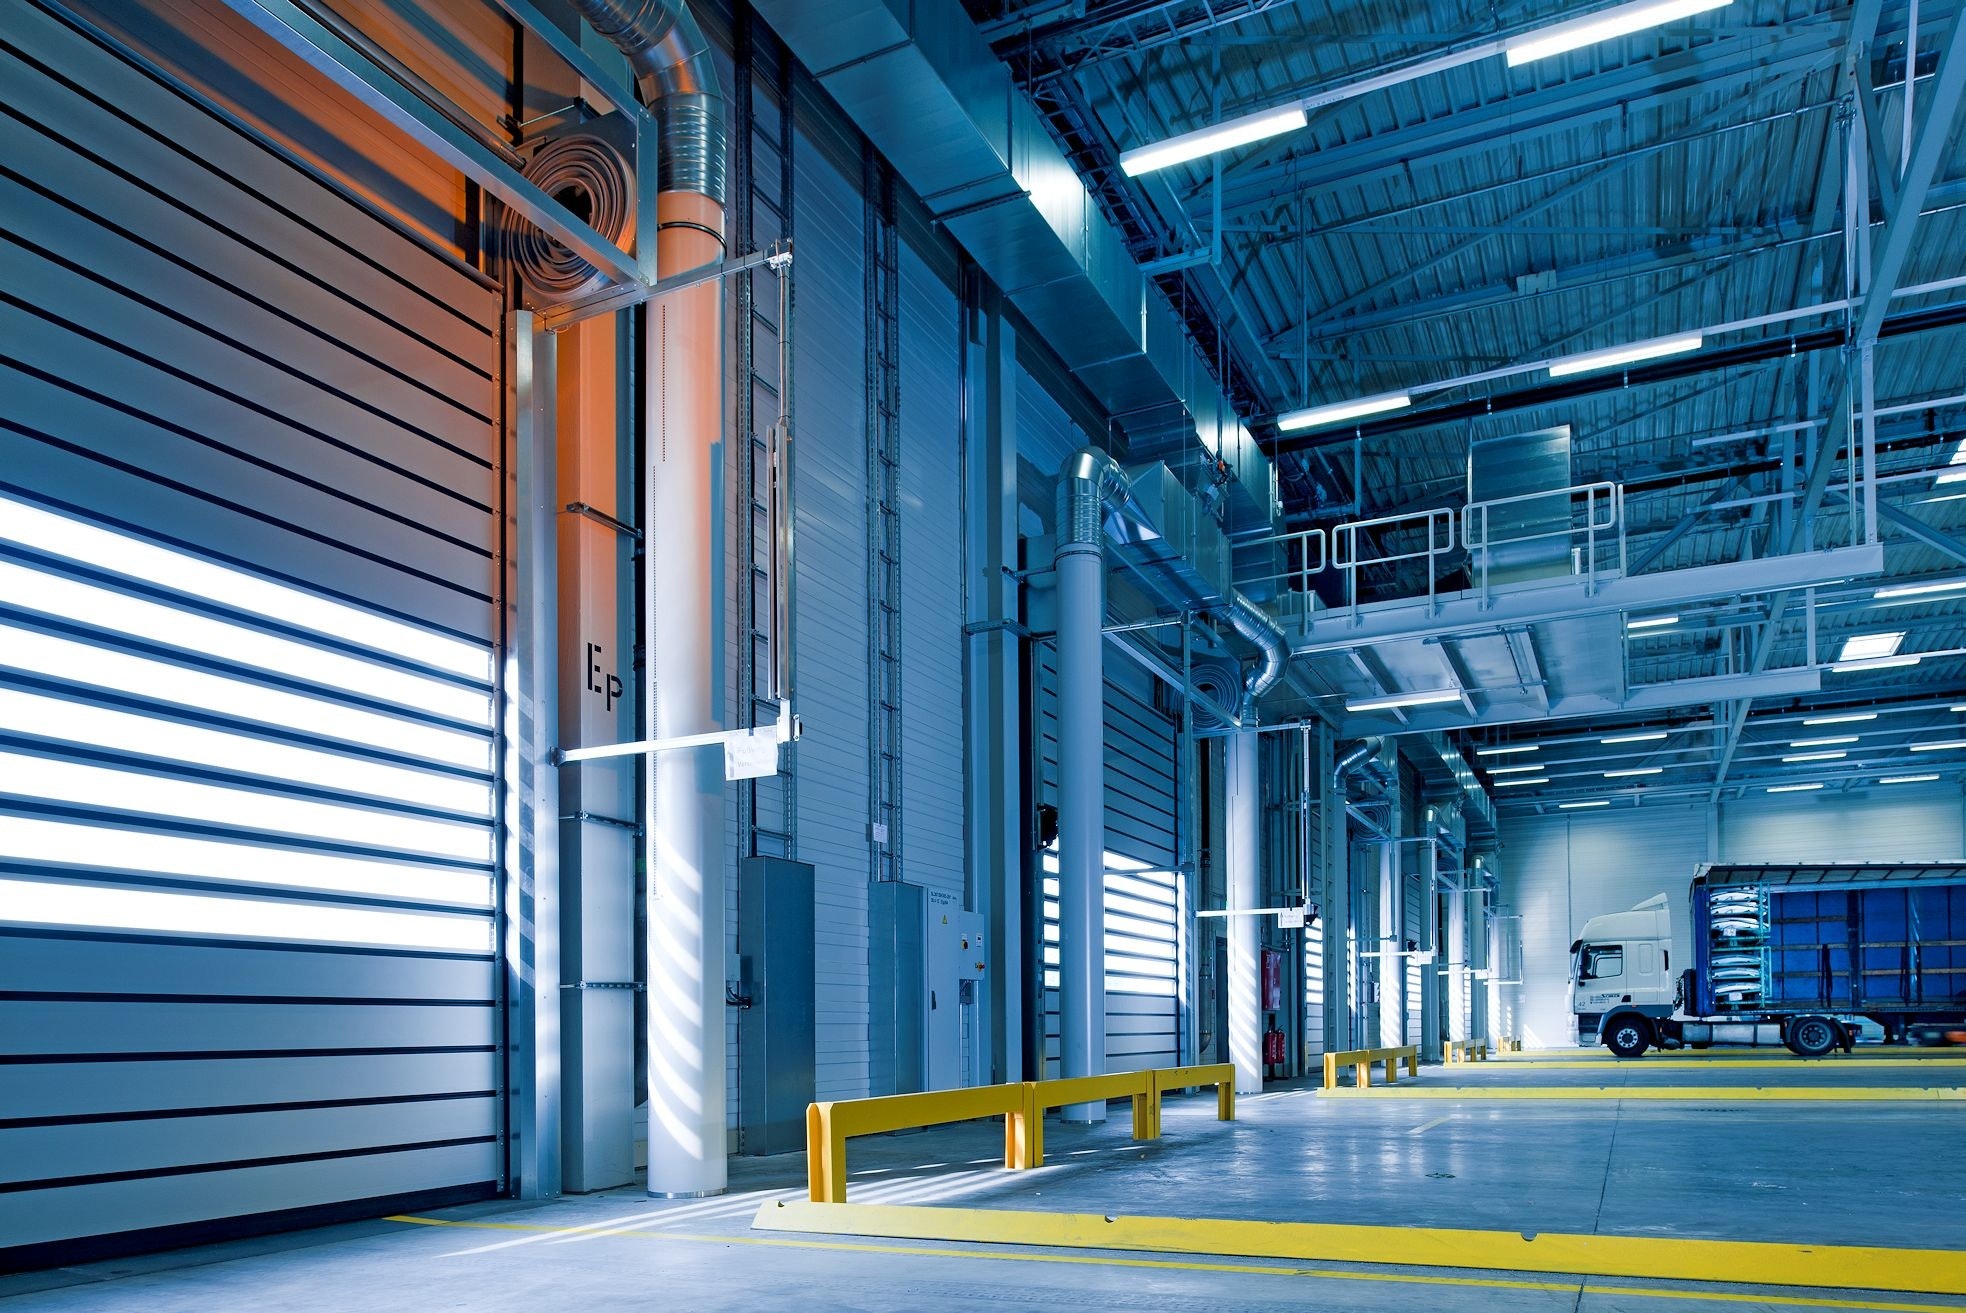 Freight forwarding logistics - a picture of the inside of a warehouse with bay doors.